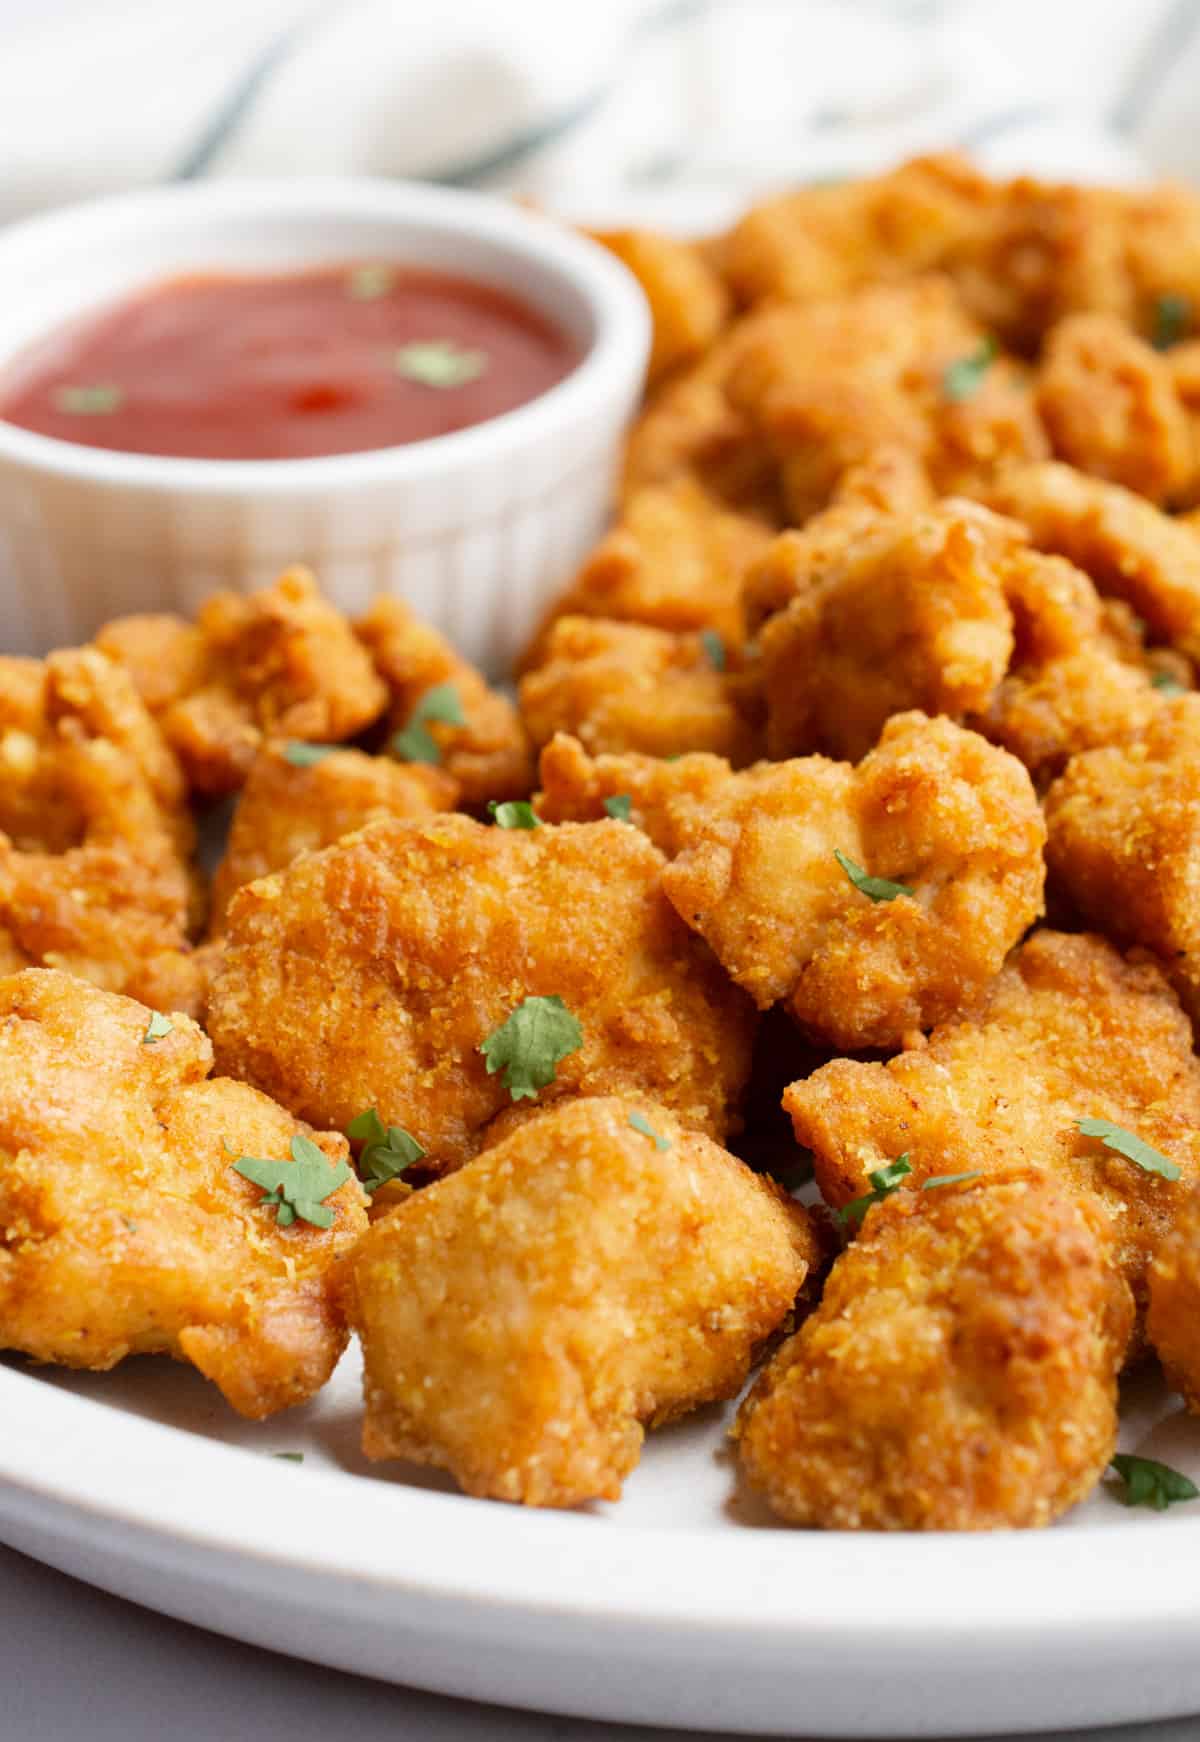 Vegan nuggets on a white plate with a bowl of dipping sauce.